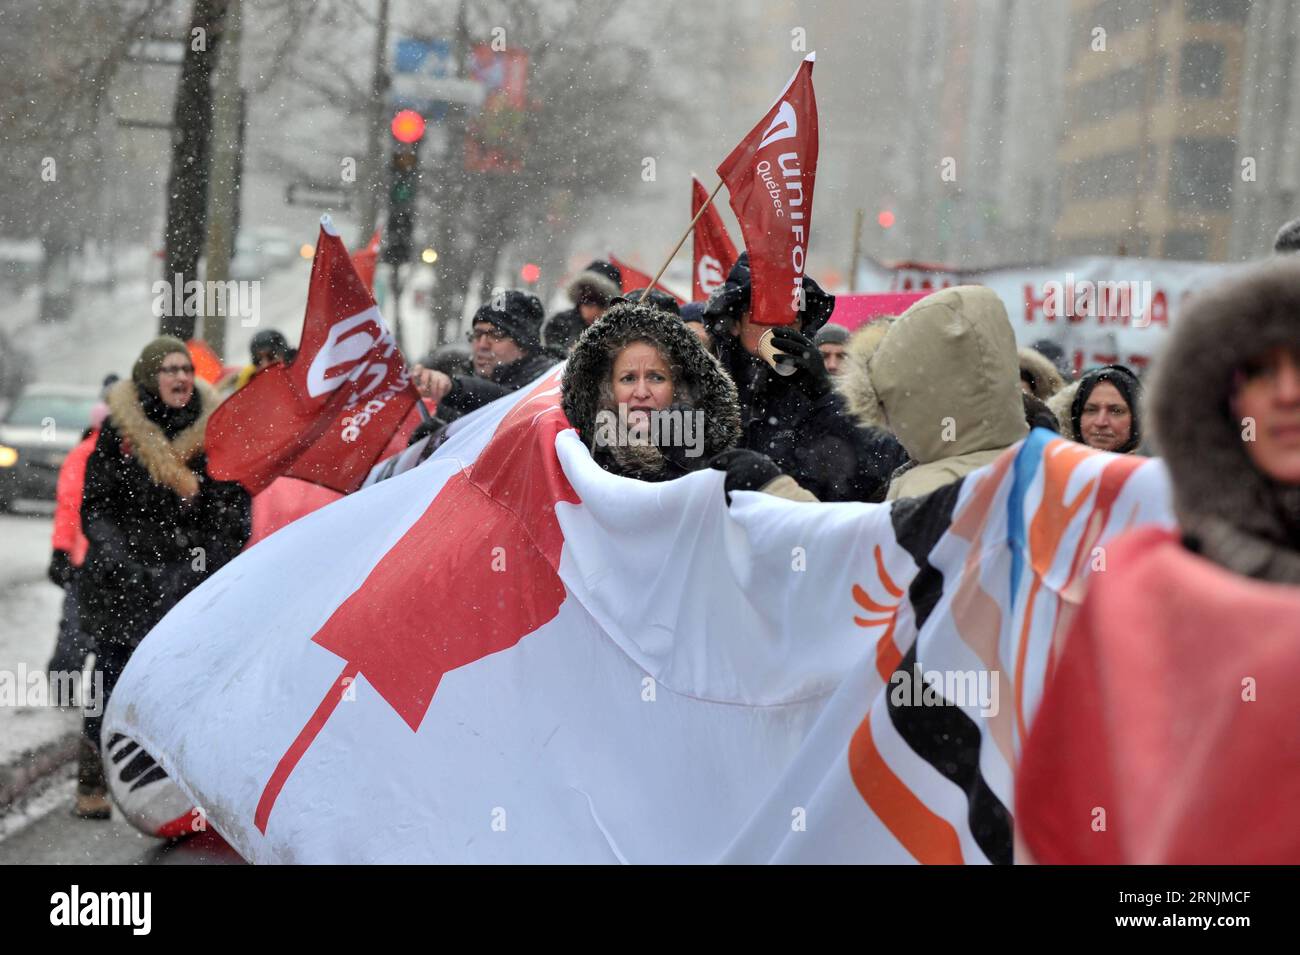 Anschlag in Quebec - Pro-muslimische Demonstration (170205) -- MONTREAL, Feb. 4, 2017 -- People take to the street to show solidarity with the Muslim community in Quebec city, where six Muslim people were killed in a terrorist attack last Sunday, in Montreal, Canada, Feb. 4, 2017. ) (sxk) CANADA-MONTREAL-QUEBEC TERRORIST ATTACK-RALLY KadrixMohamed PUBLICATIONxNOTxINxCHN   Stop in Quebec pro Muslim Demonstration  Montreal Feb 4 2017 Celebrities Take to The Street to Show Solidarity With The Muslim Community in Quebec City Where Six Muslim Celebrities Were KILLED in a Terrorist Attack Load Sunda Stock Photo